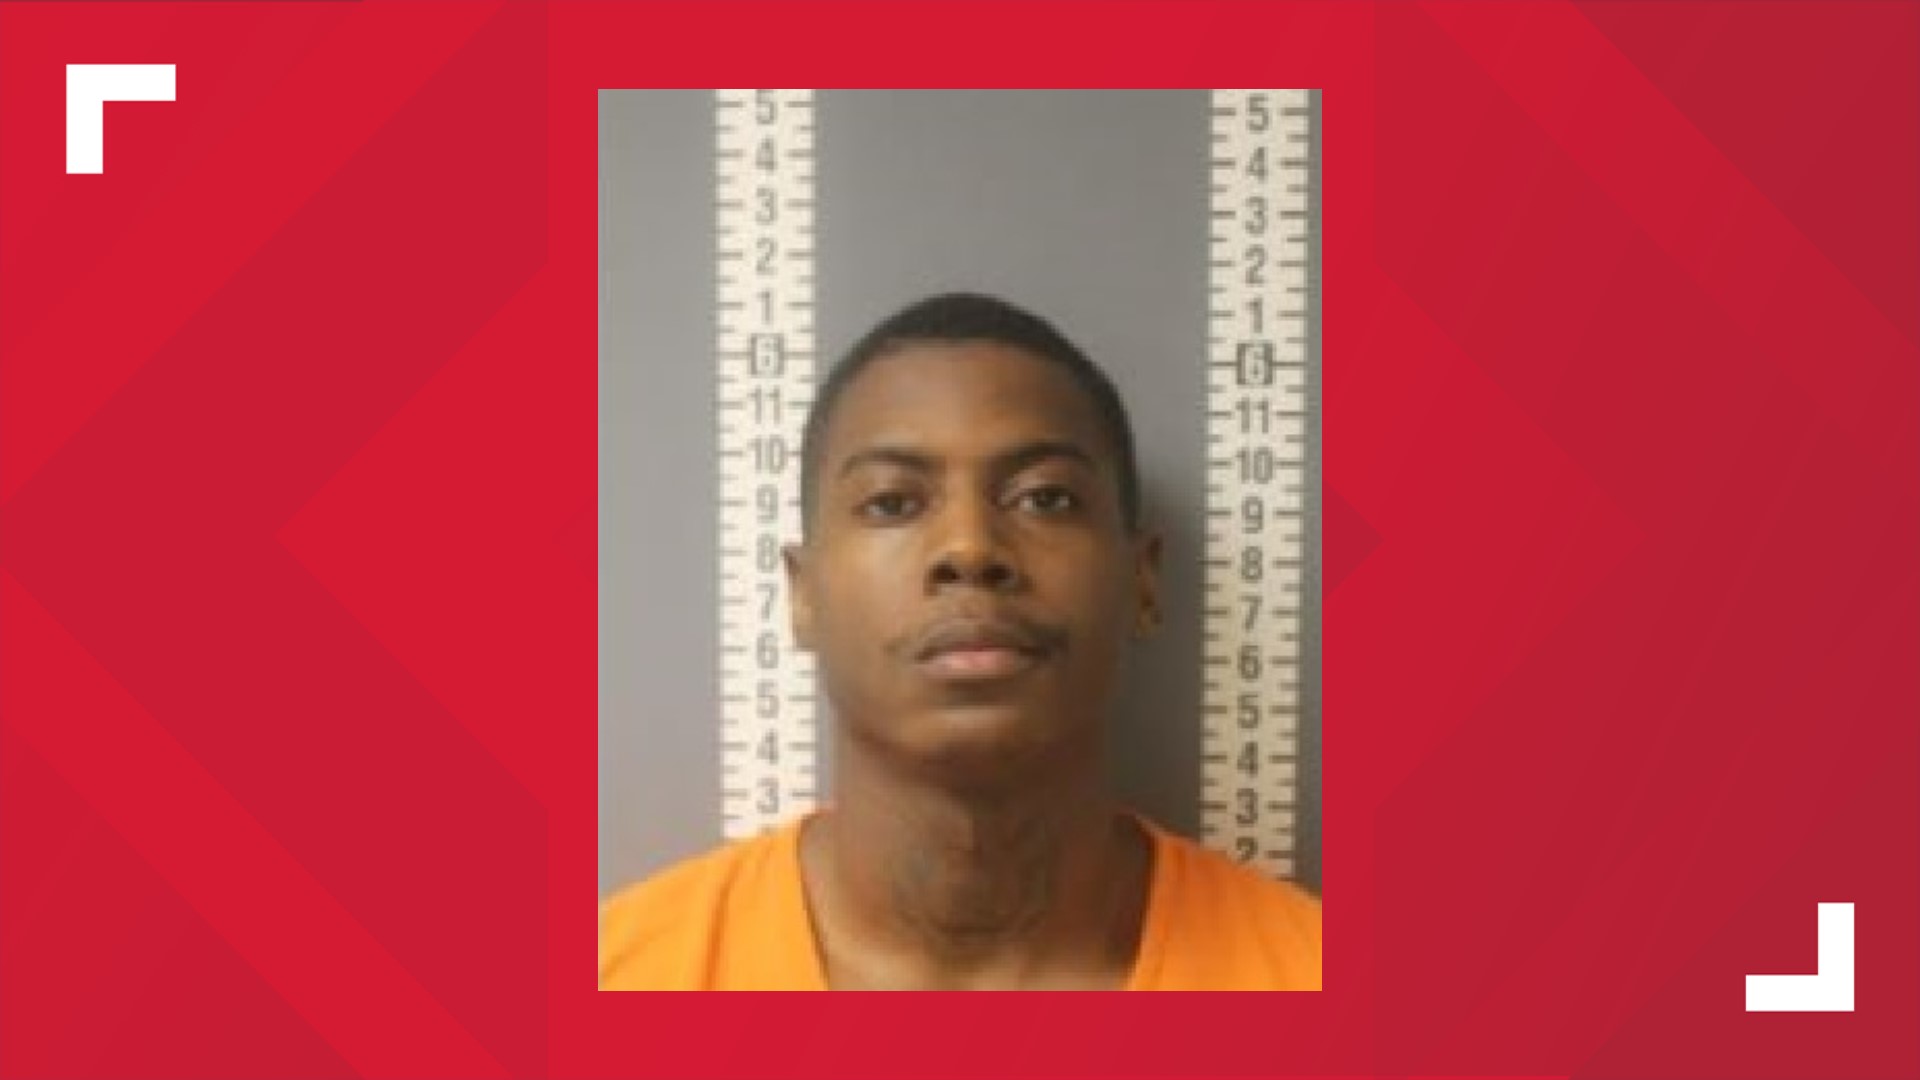 Hezekiah Floyd Campbell, 21, of the 1200 block of Derry Street, is charged with criminal homicide, among other related charges, for his role in the incident.